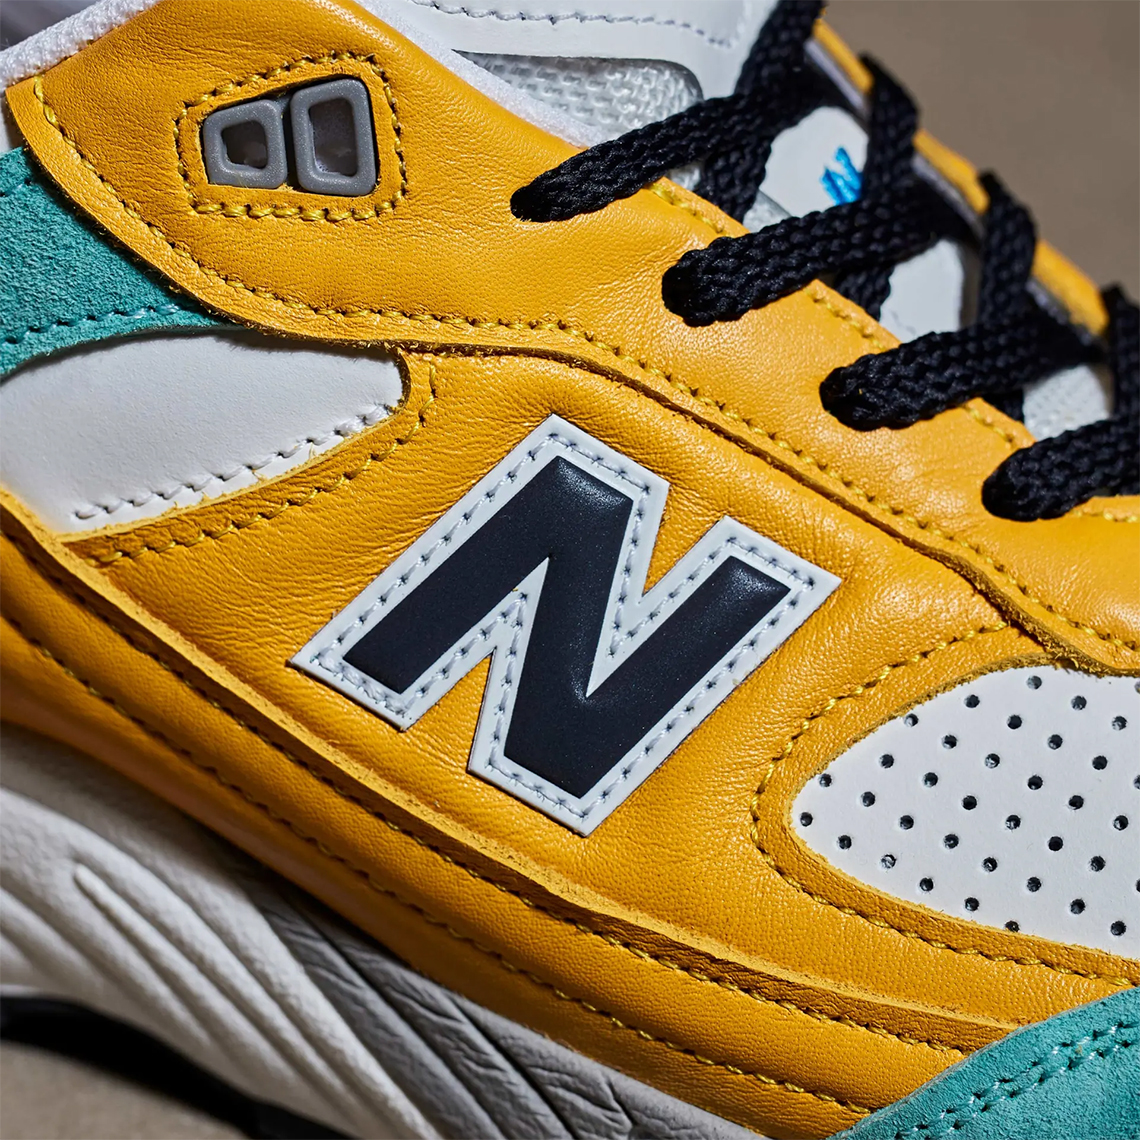 Sns New Balance made 992 Surfaces in White and Navy Mint Yellow M991sns Release Date 3